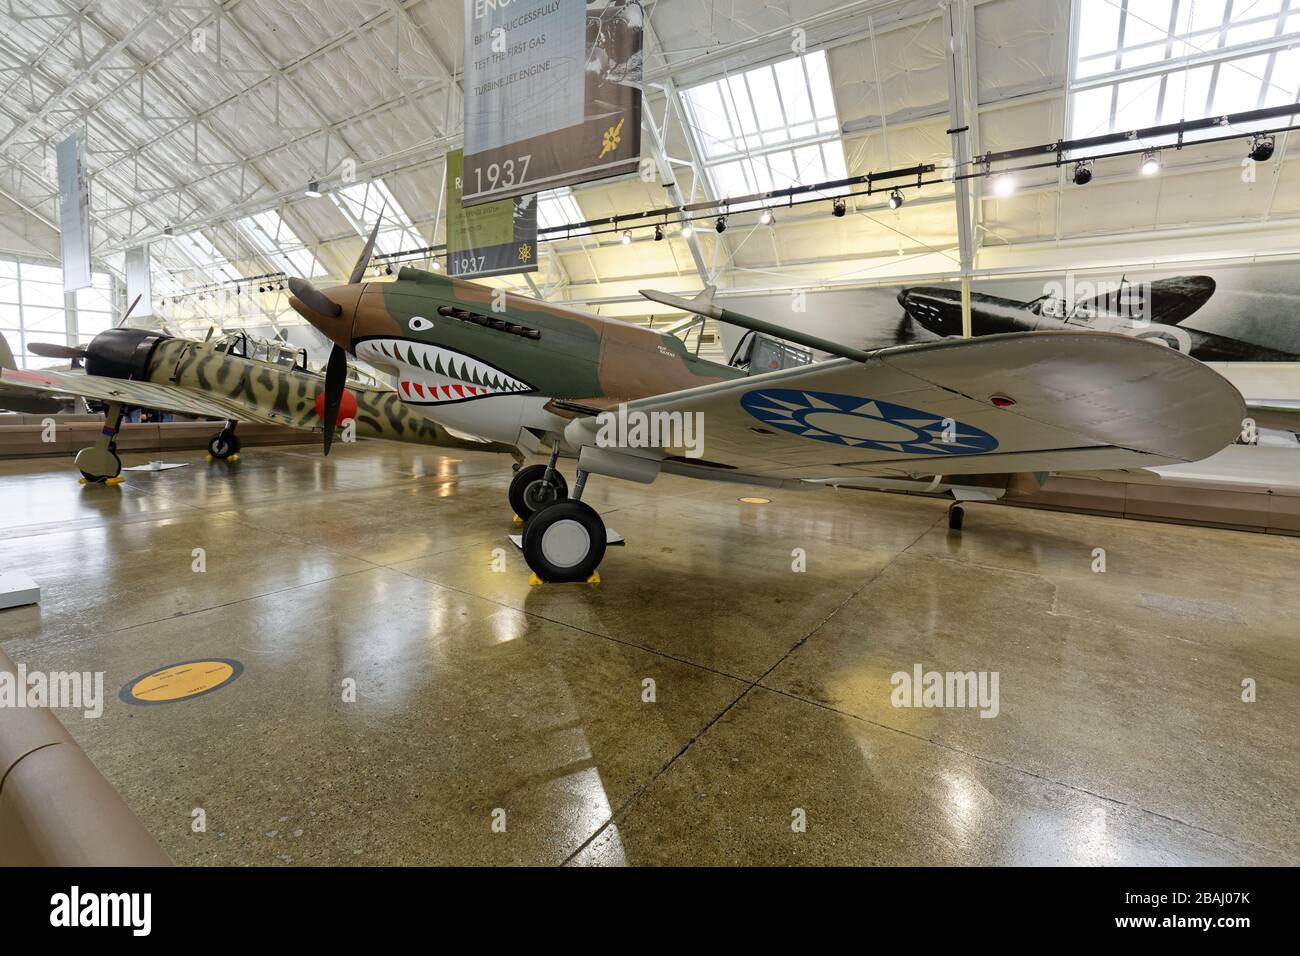 SEPTEMBER 19, 2015, EVERETT, WA: Wide shot of a Curtiss P-40C Tomahawk on display at a Seattle-area museum, seen with its nemesis, a Japanese Zero. Stock Photo